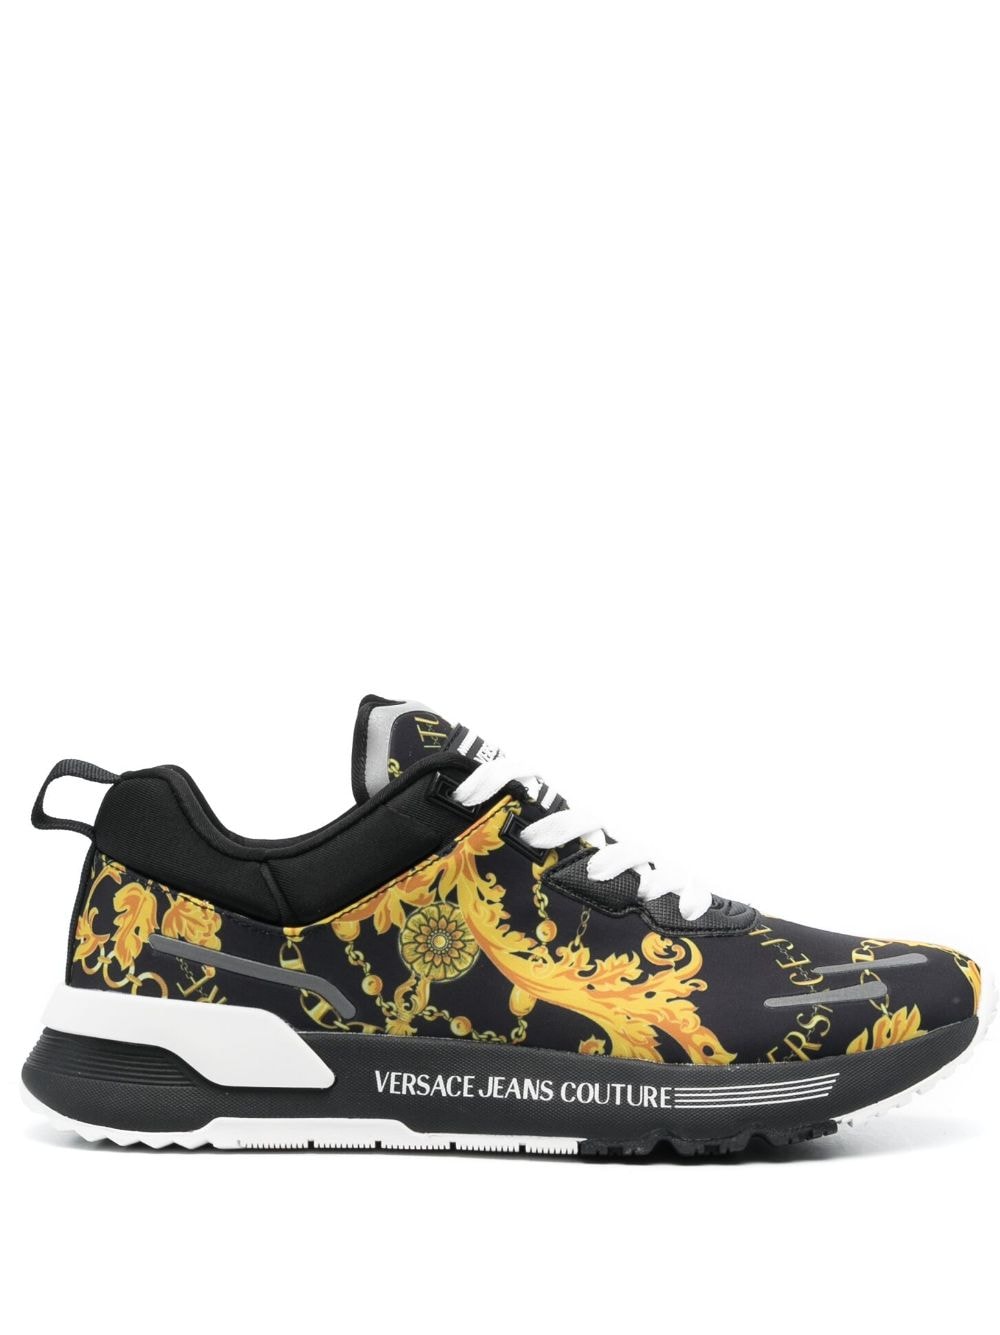 Versace Jeans Couture baroque-pattern low-top sneakers - Black